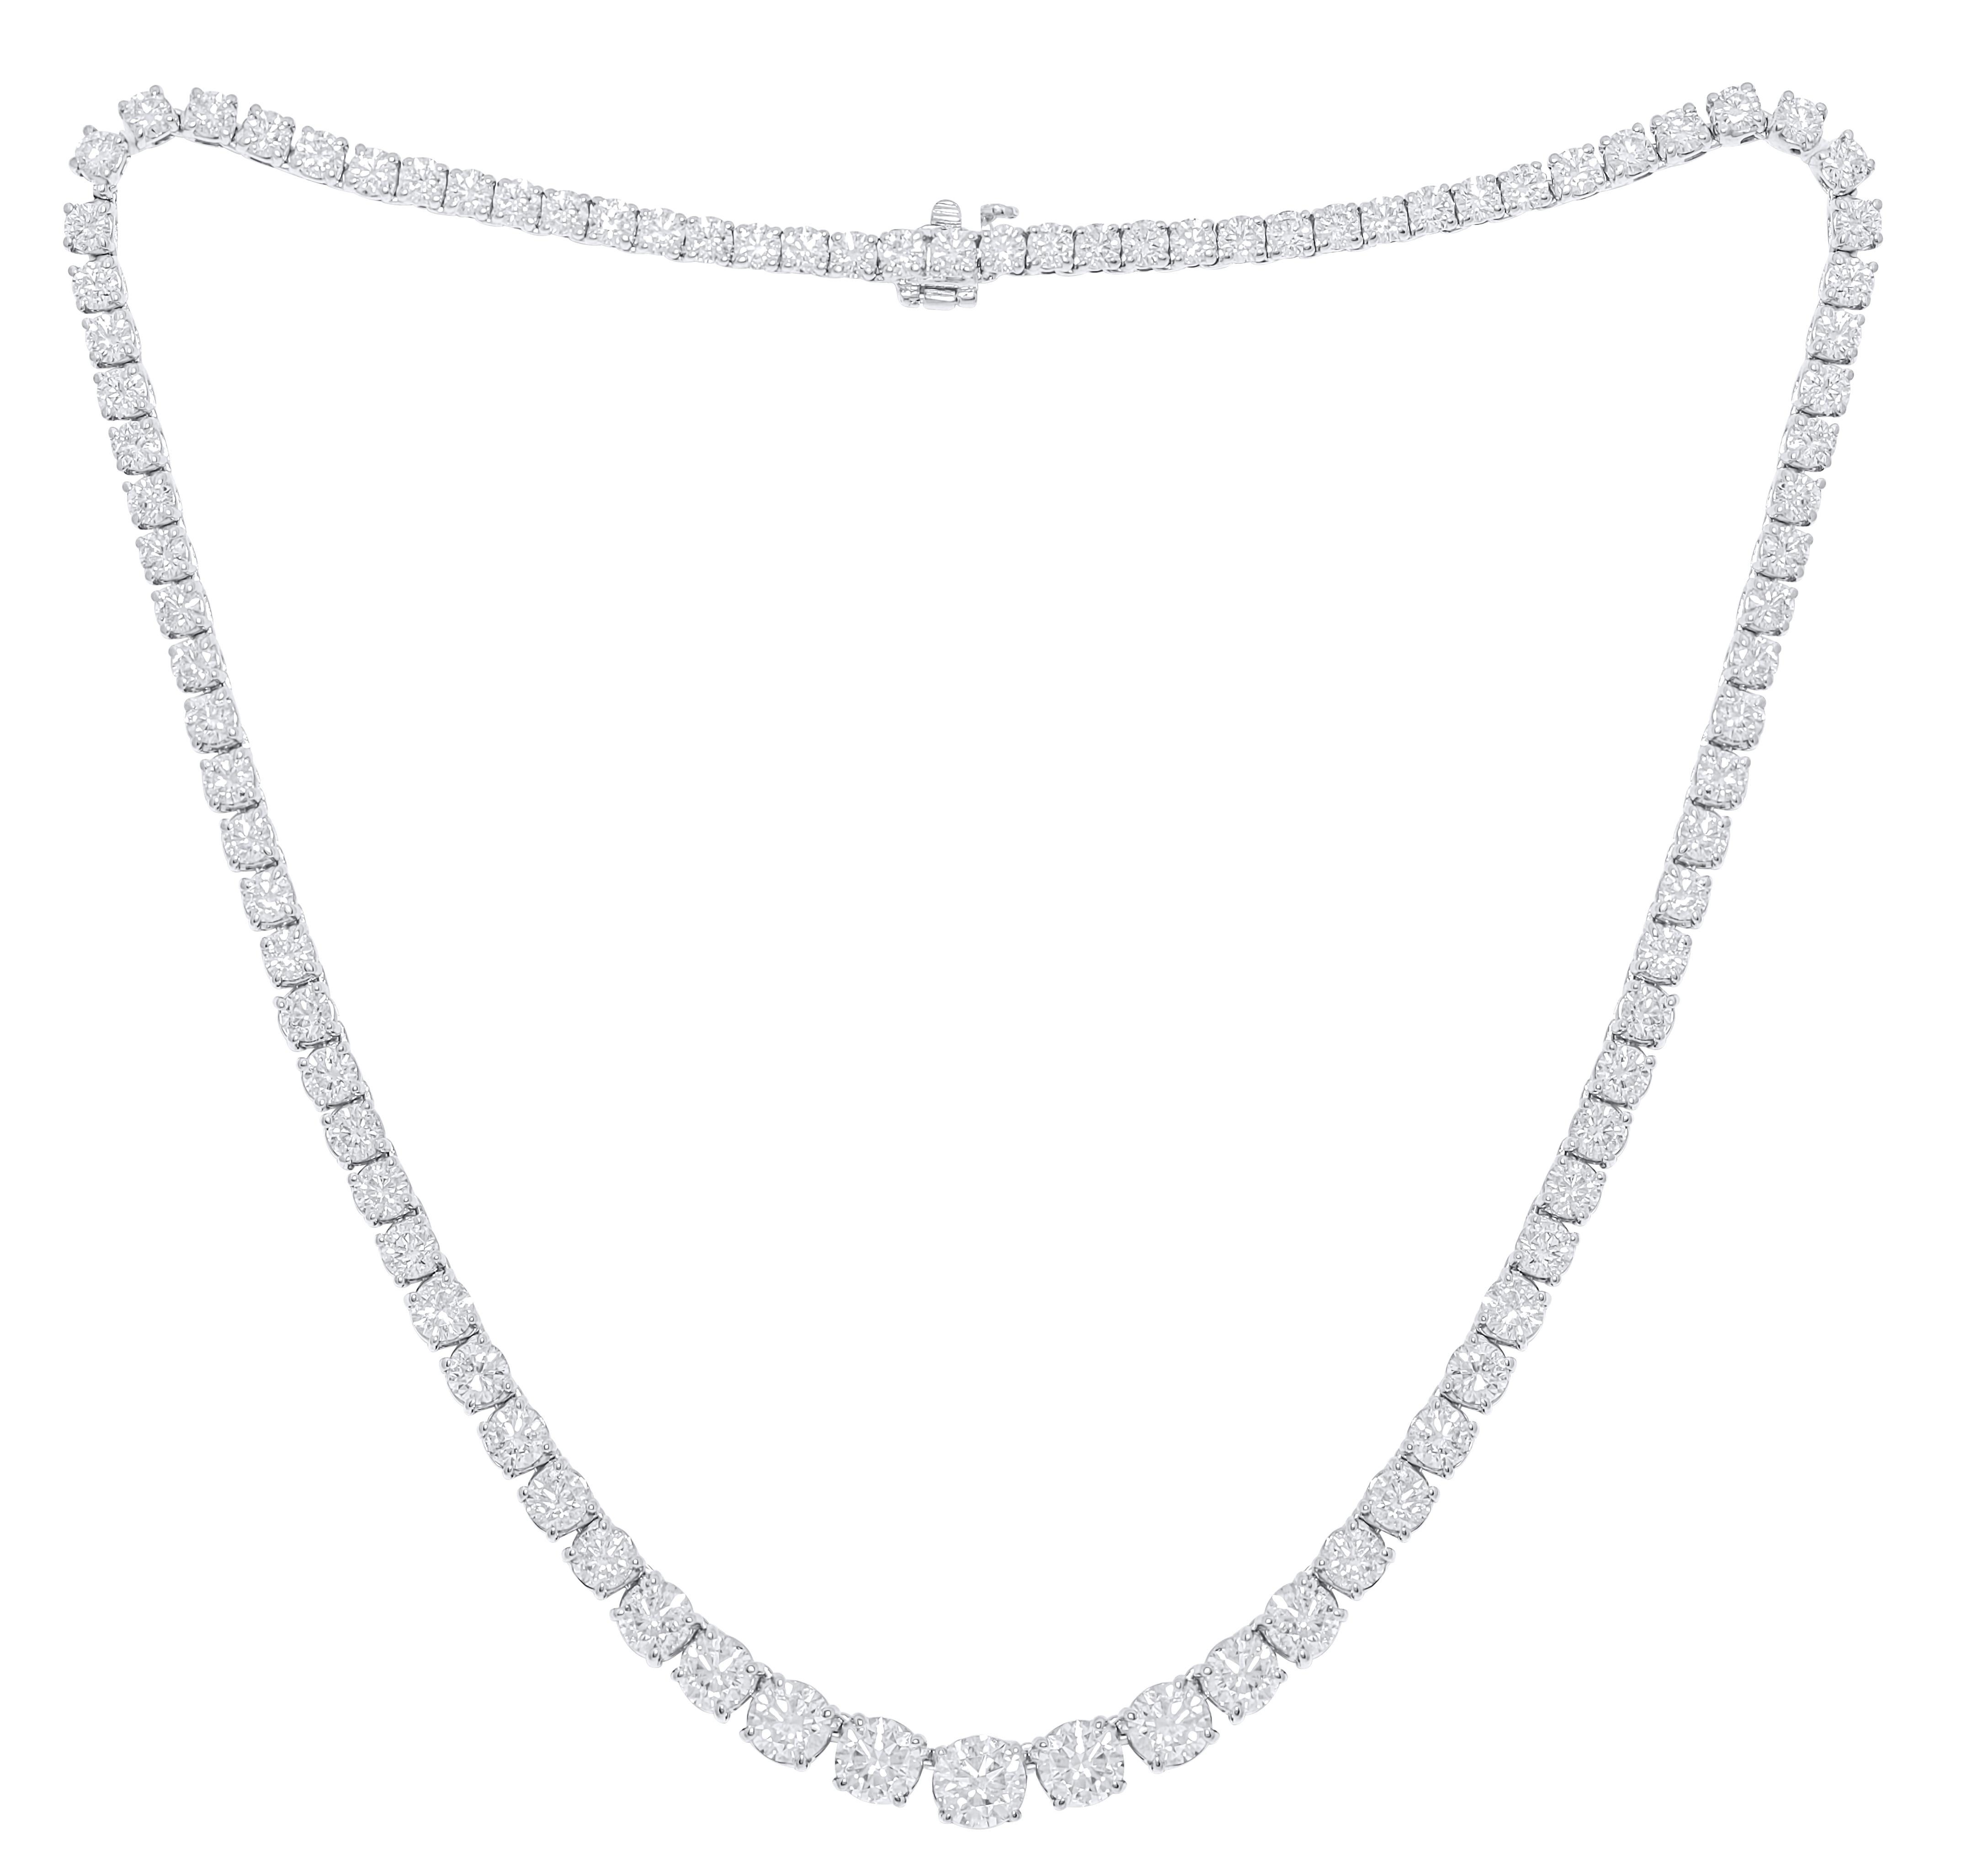 Round Cut Diana M. 18kt White Gold Graduated Riviera Tennis Necklace 17.00 cts 4 prong  For Sale